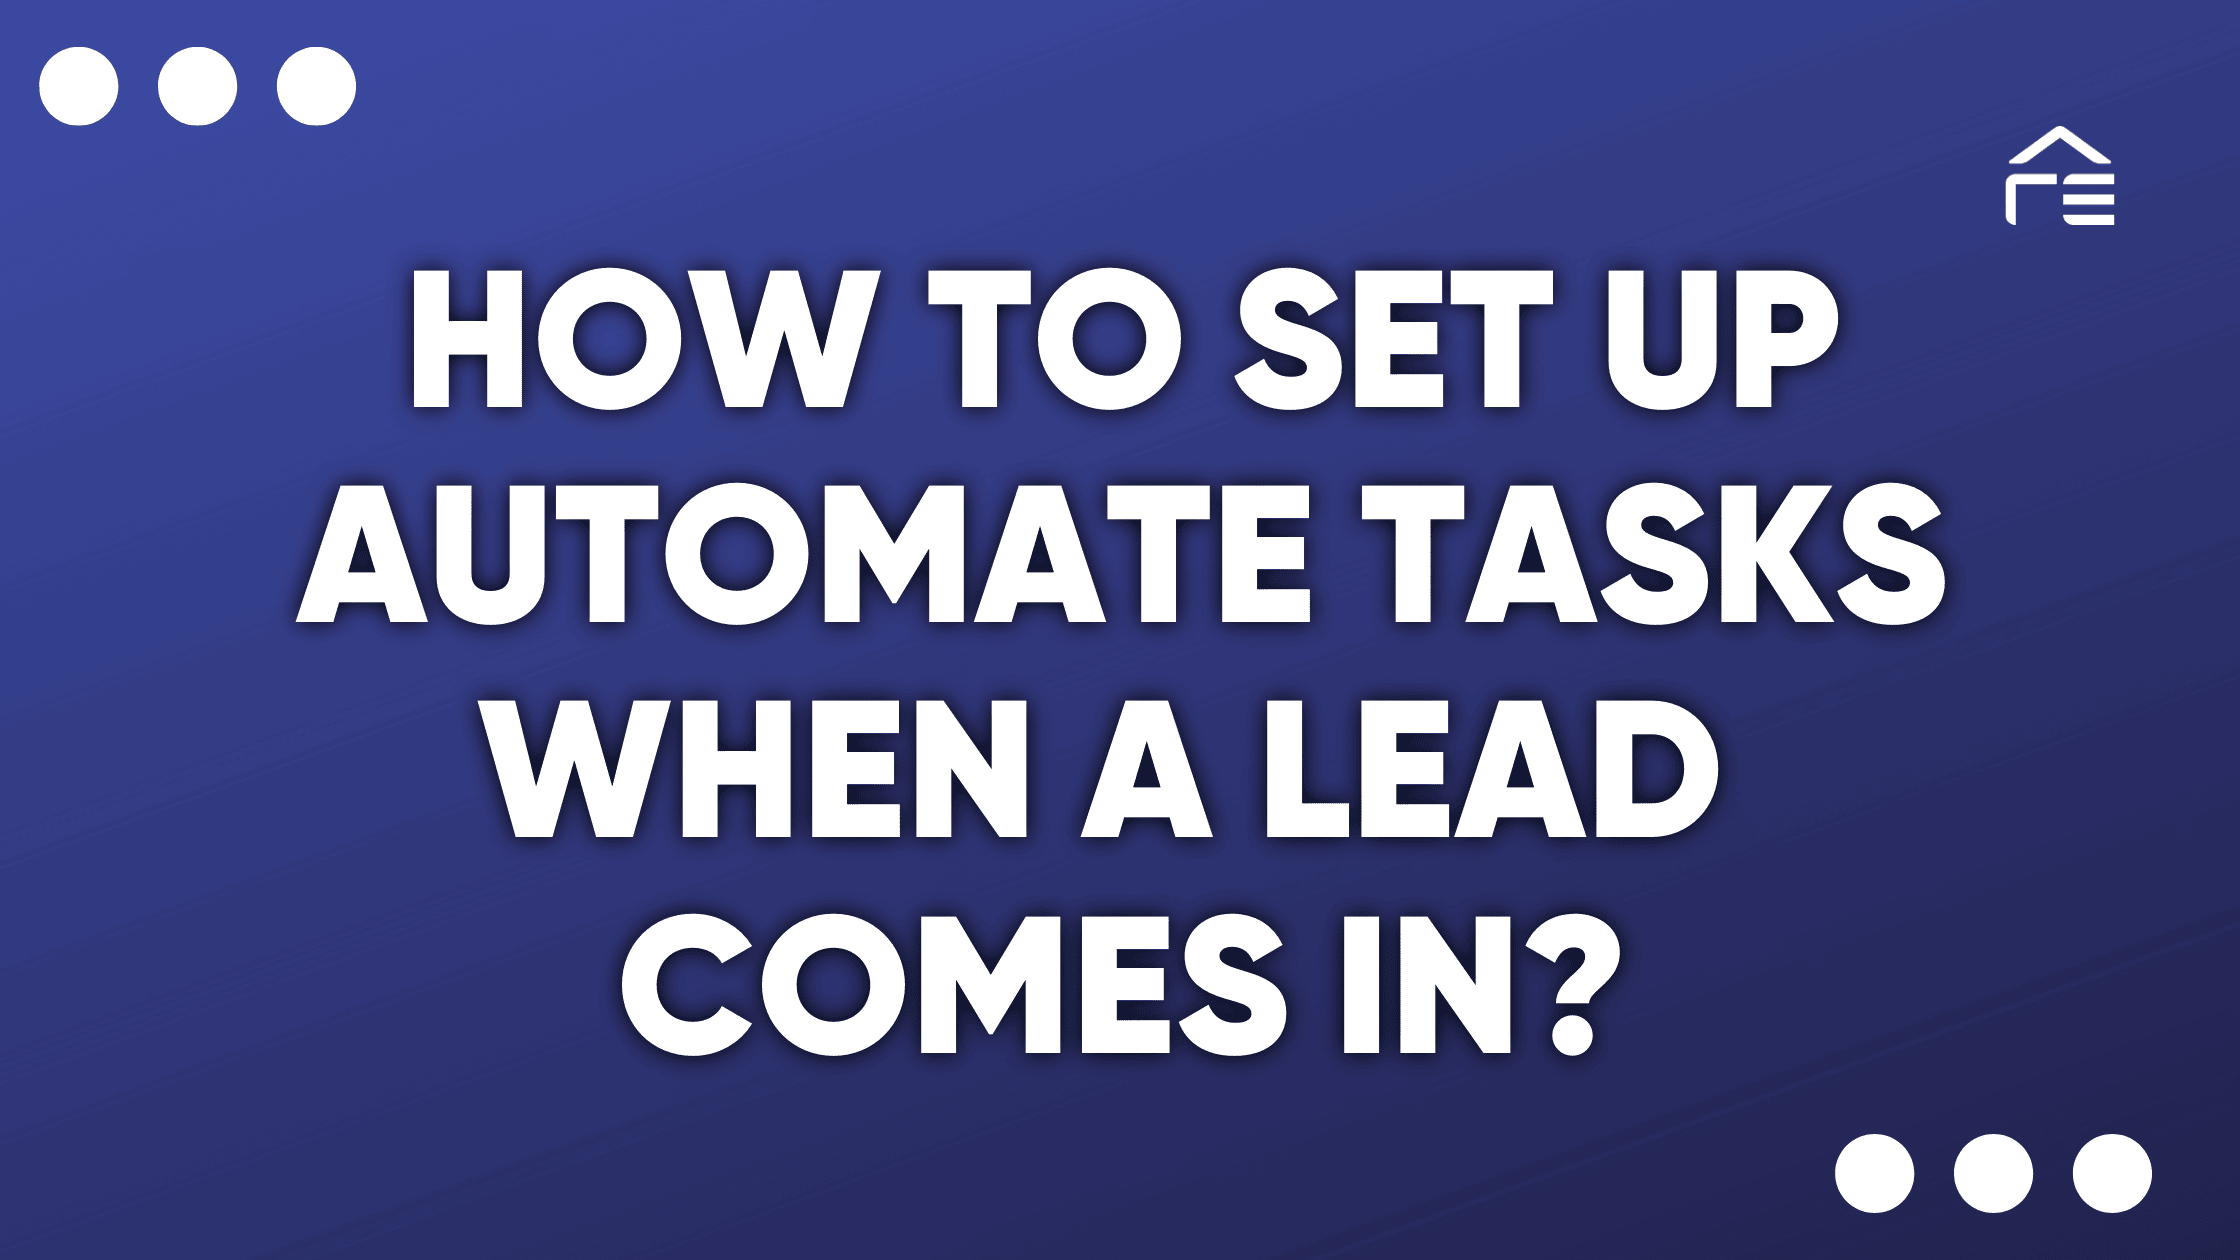 How to Set Up Automate Tasks When a Lead Comes in?